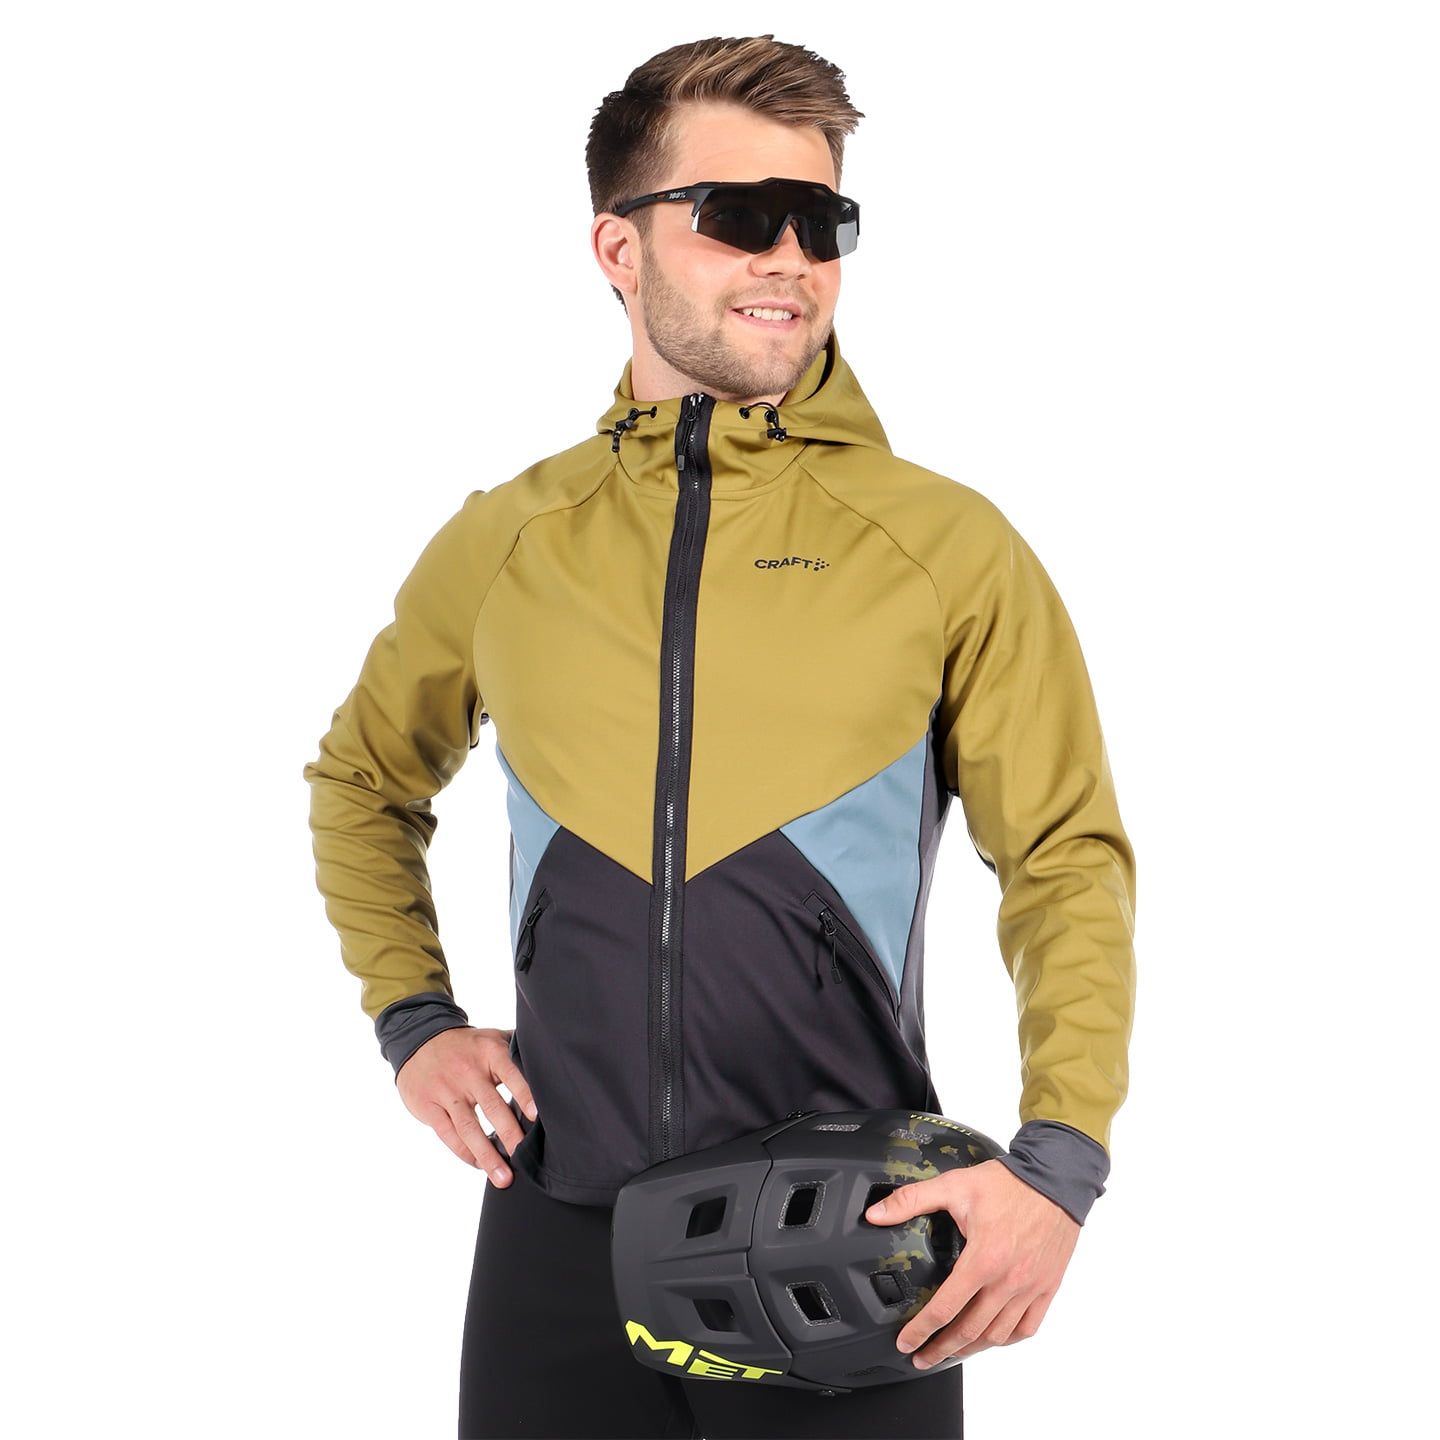 CRAFT Core Glide Hood Winter Jacket Thermal Jacket, for men, size 2XL, Winter jacket, Cycling clothing